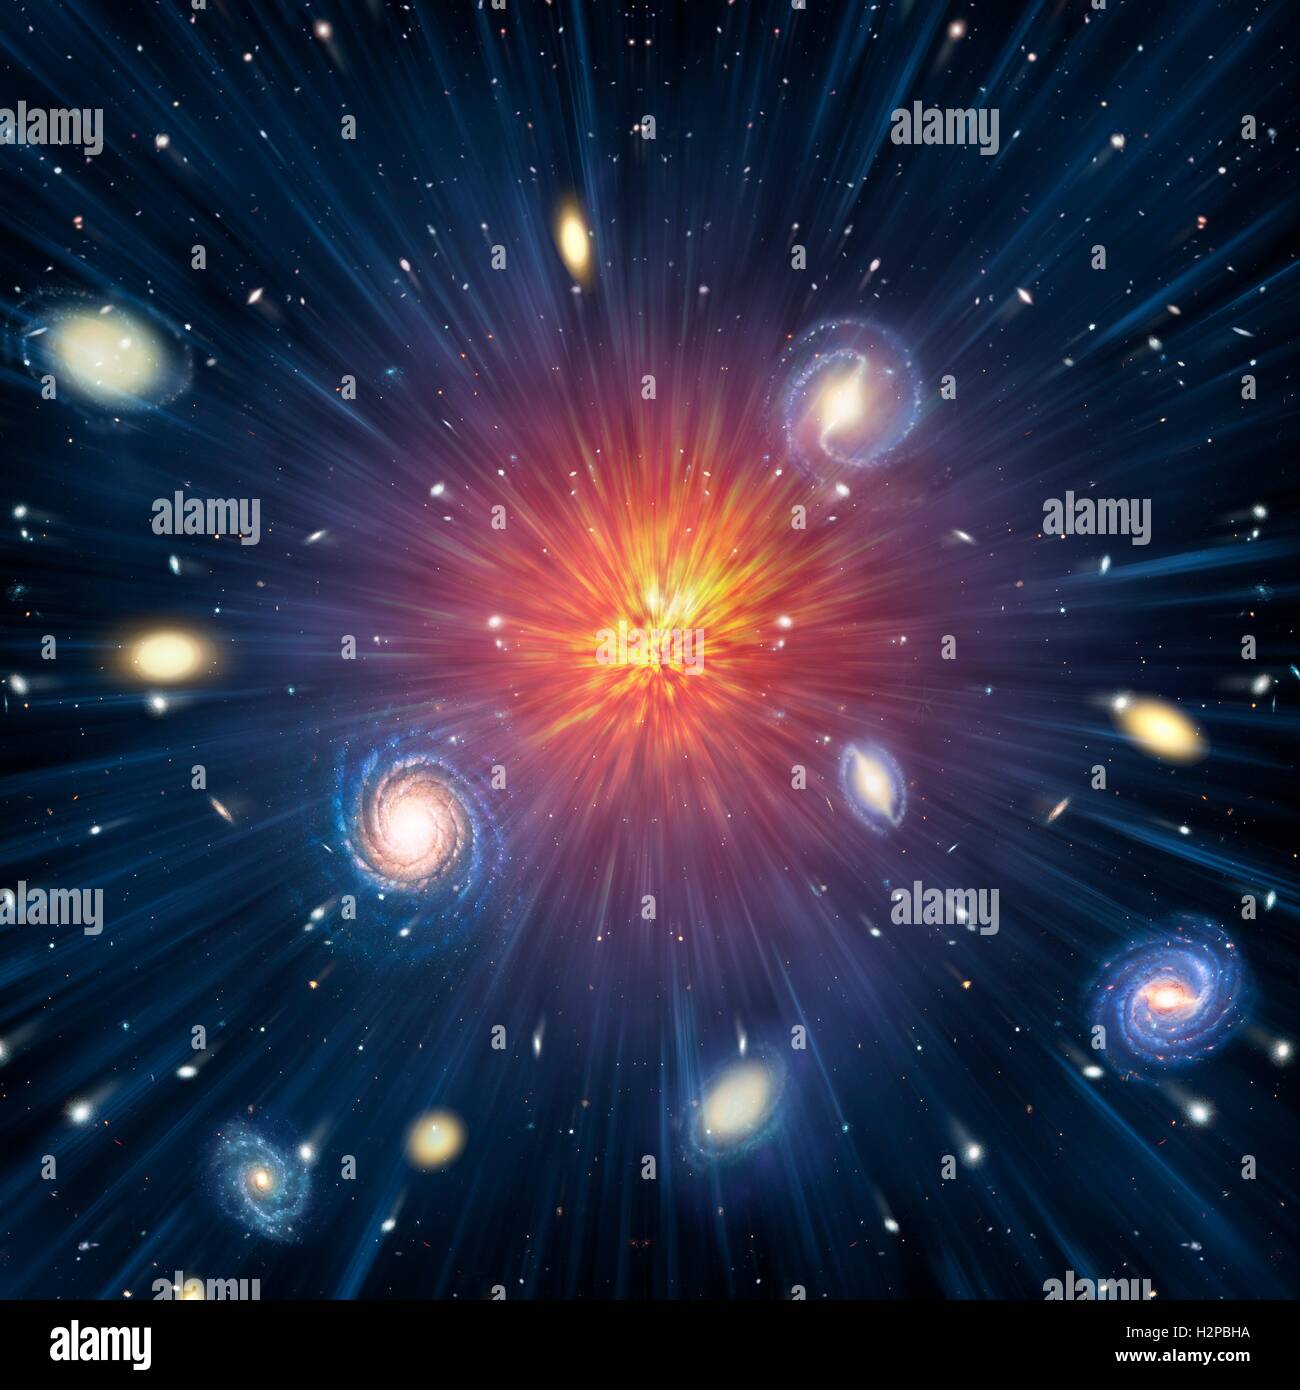 Big Bang, conceptual image. Computer illustration representing the origin of the universe. The term Big Bang describes the initial expansion of all the matter in the universe from an infinitely compact state 13.7 billion years ago. The initial conditions Stock Photo